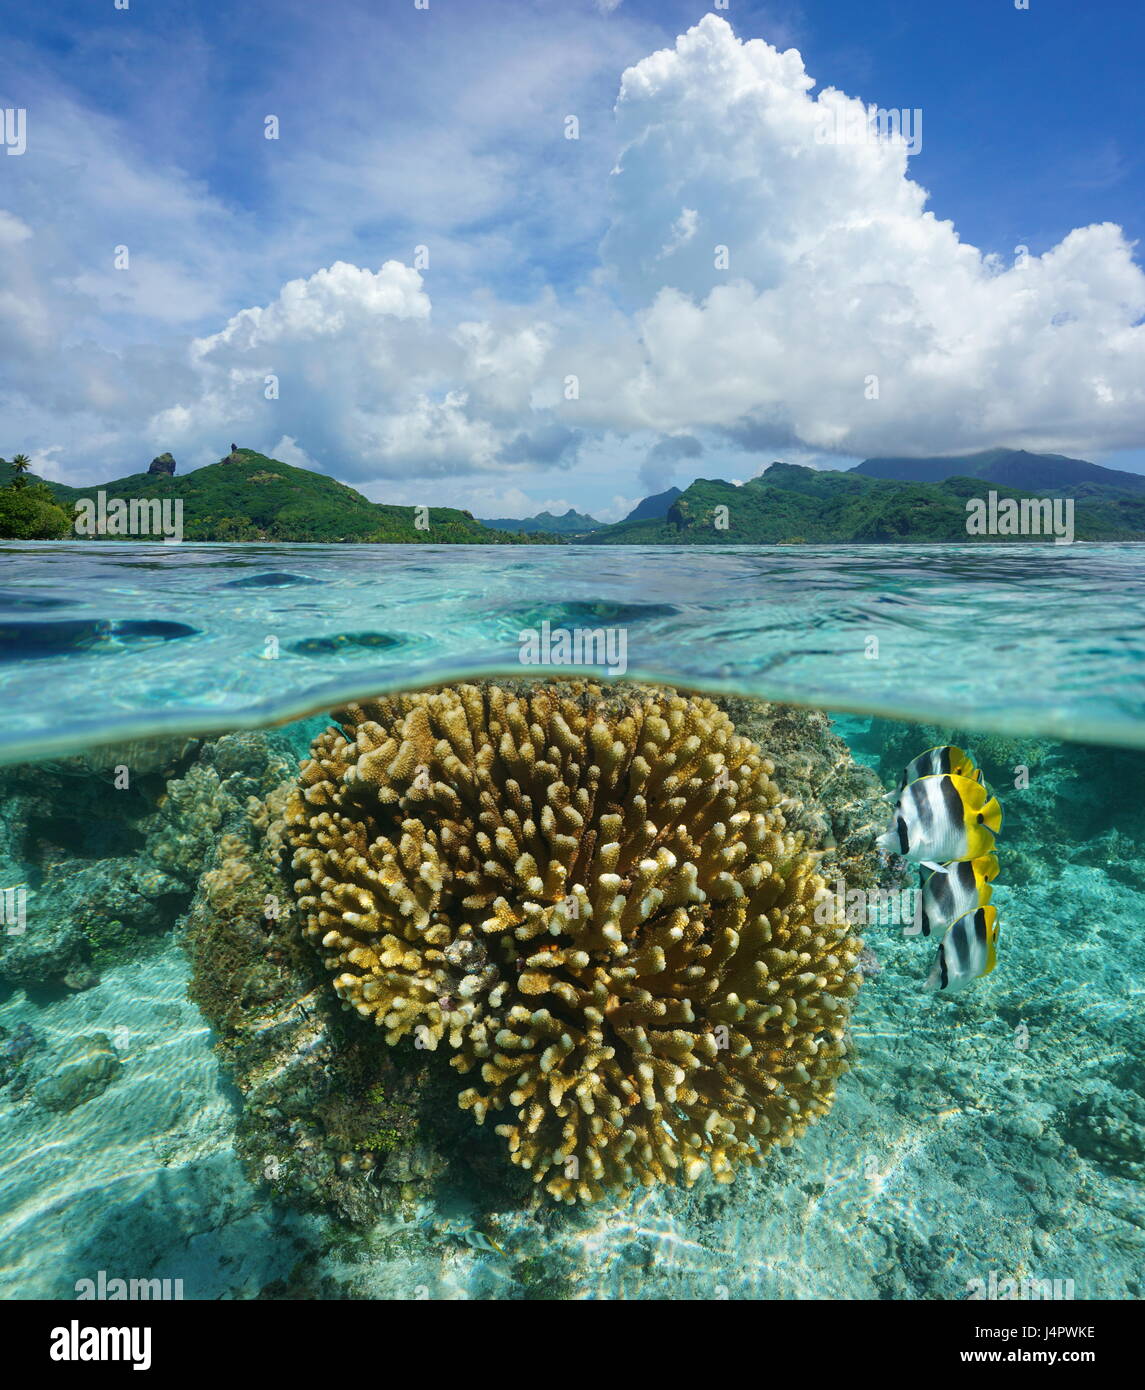 Over and under sea surface in the lagoon of a Pacific island with coral and tropical fish underwater, Huahine, south Pacific ocean, French Polynesia Stock Photo